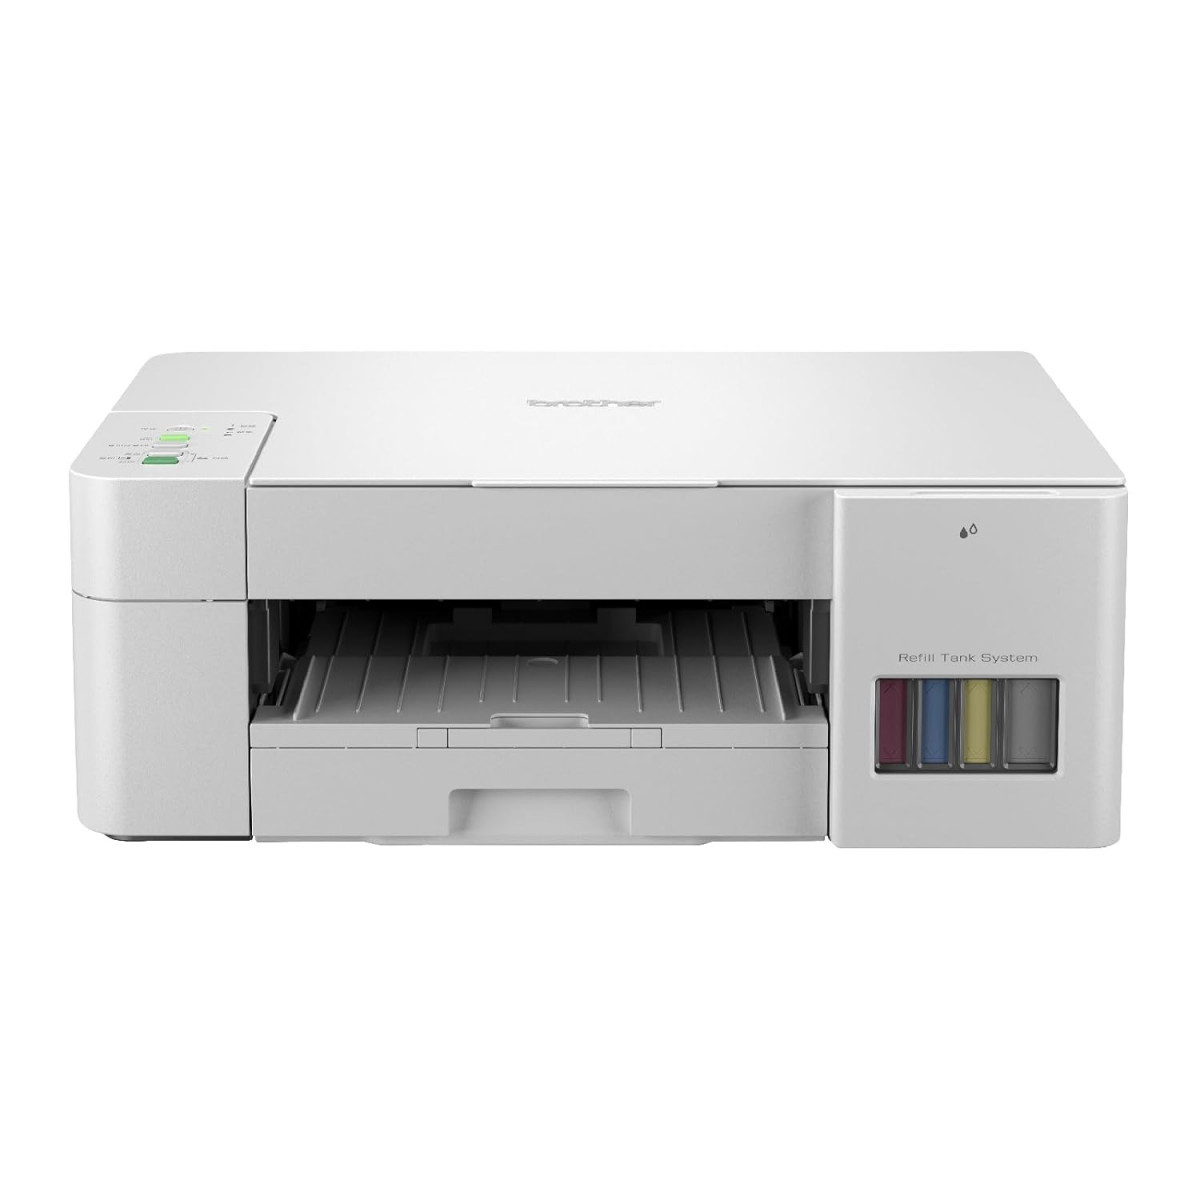 Brother DCP-T426W - Wi-Fi Color Ink Tank Multifunction (Print, Scan & Copy) All in One Printer for Home